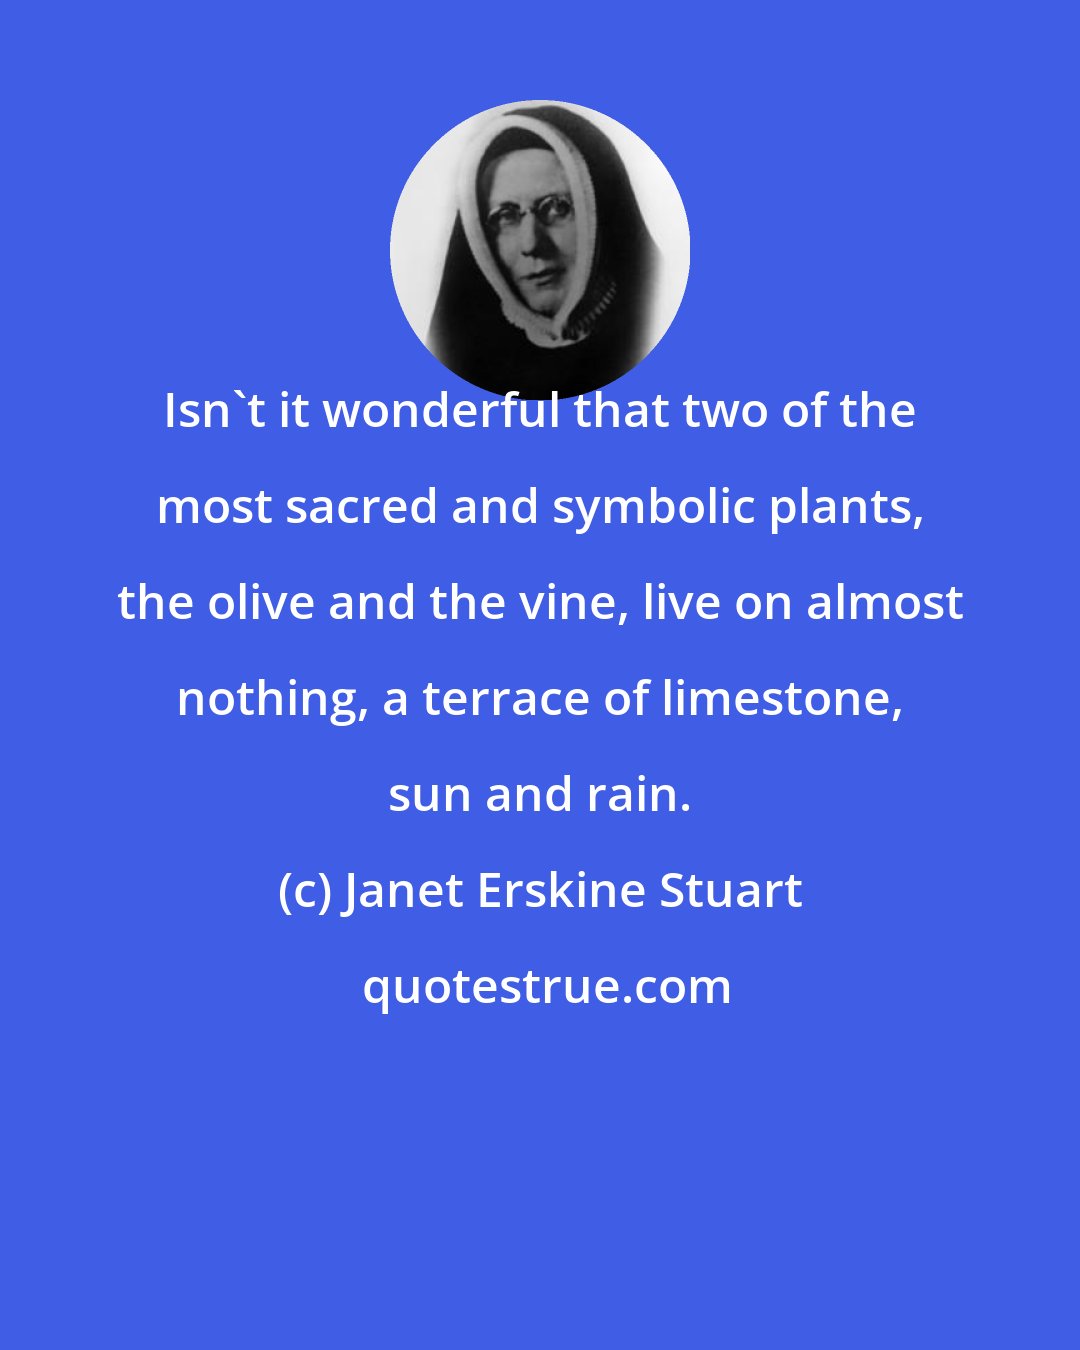 Janet Erskine Stuart: Isn't it wonderful that two of the most sacred and symbolic plants, the olive and the vine, live on almost nothing, a terrace of limestone, sun and rain.